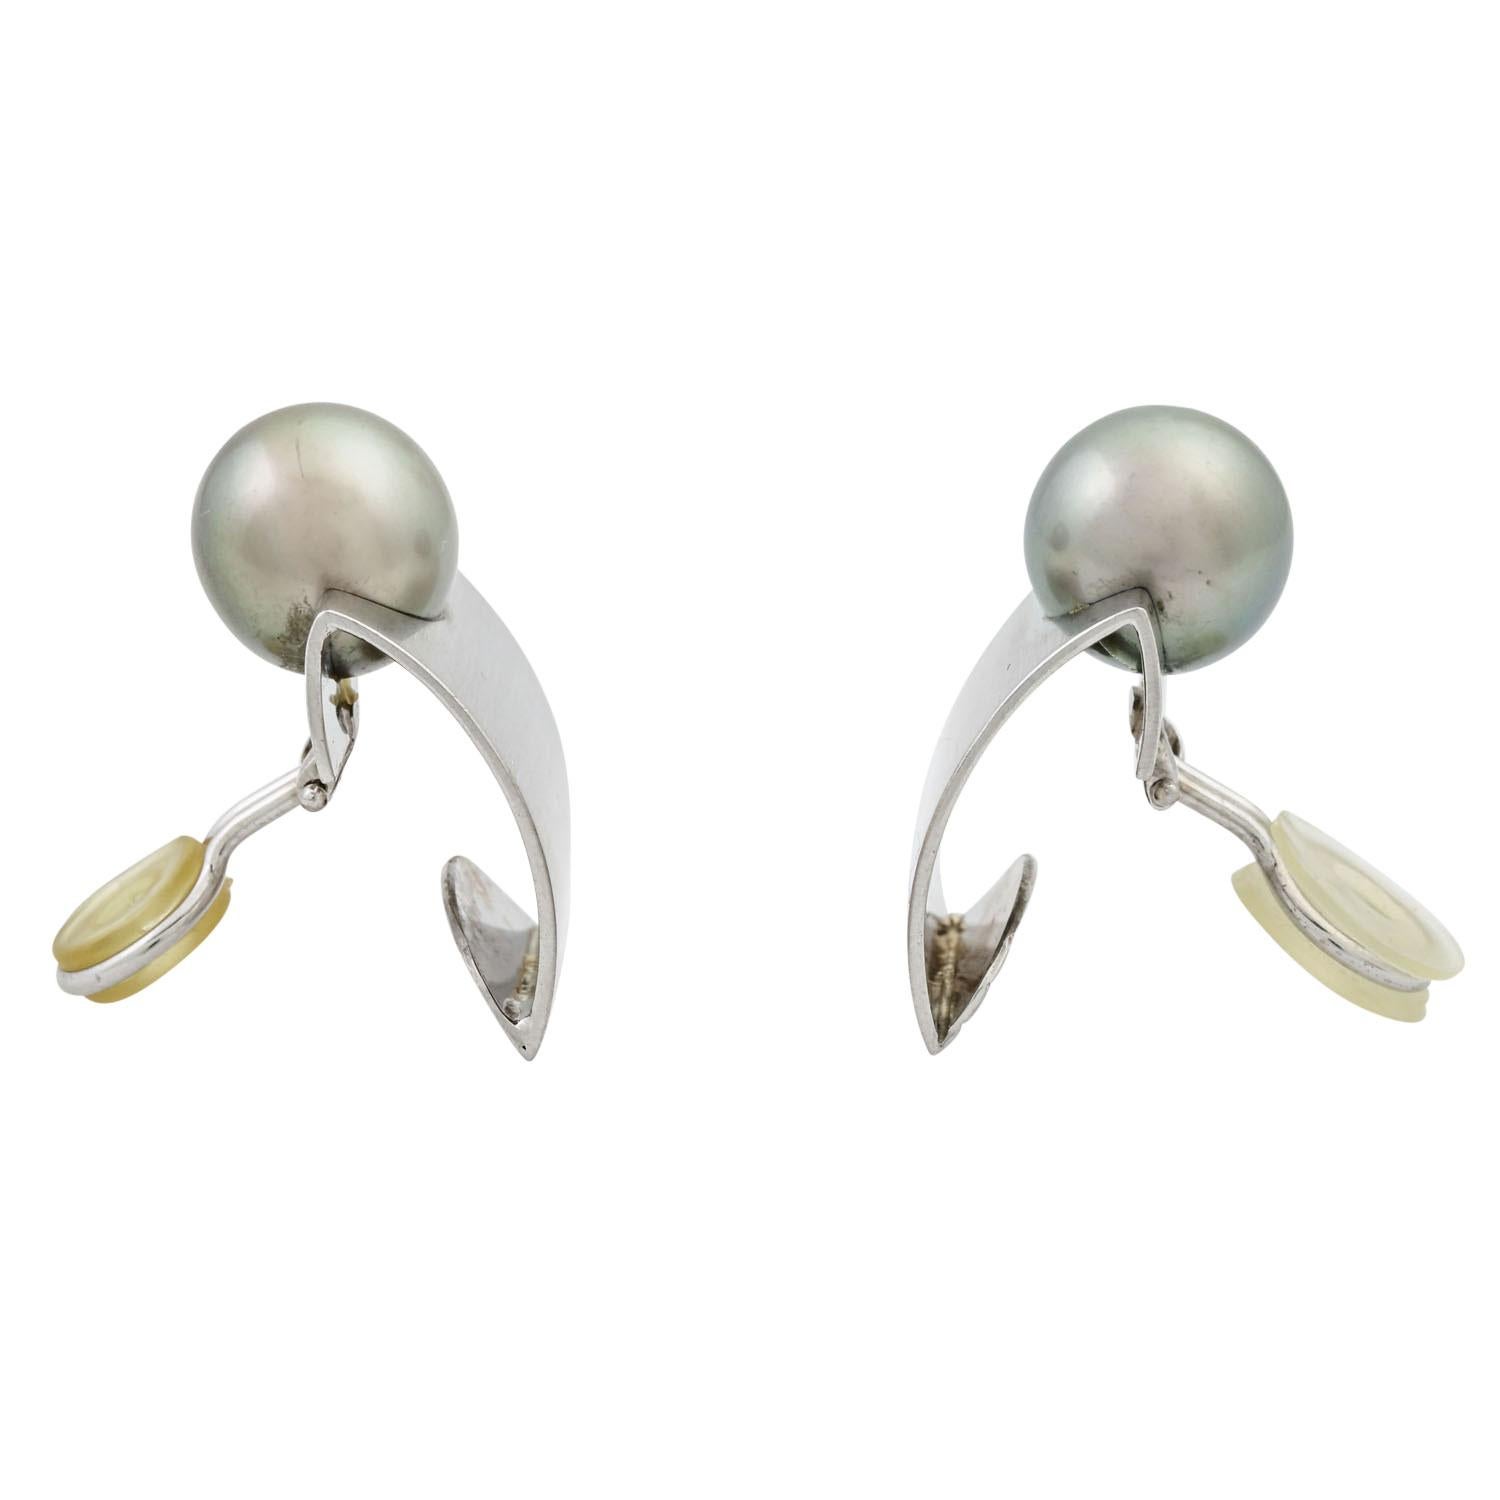 convex rectangular shape made of matted WG 18K, each with a fine silver-grey cultured pearl approx. 11.5 mm, 22.4 g, 20th/21st Century, slight signs of wear, nice workmanship, with maker's mark. (15)

 Earclips with silvergrey Tahitian cultured